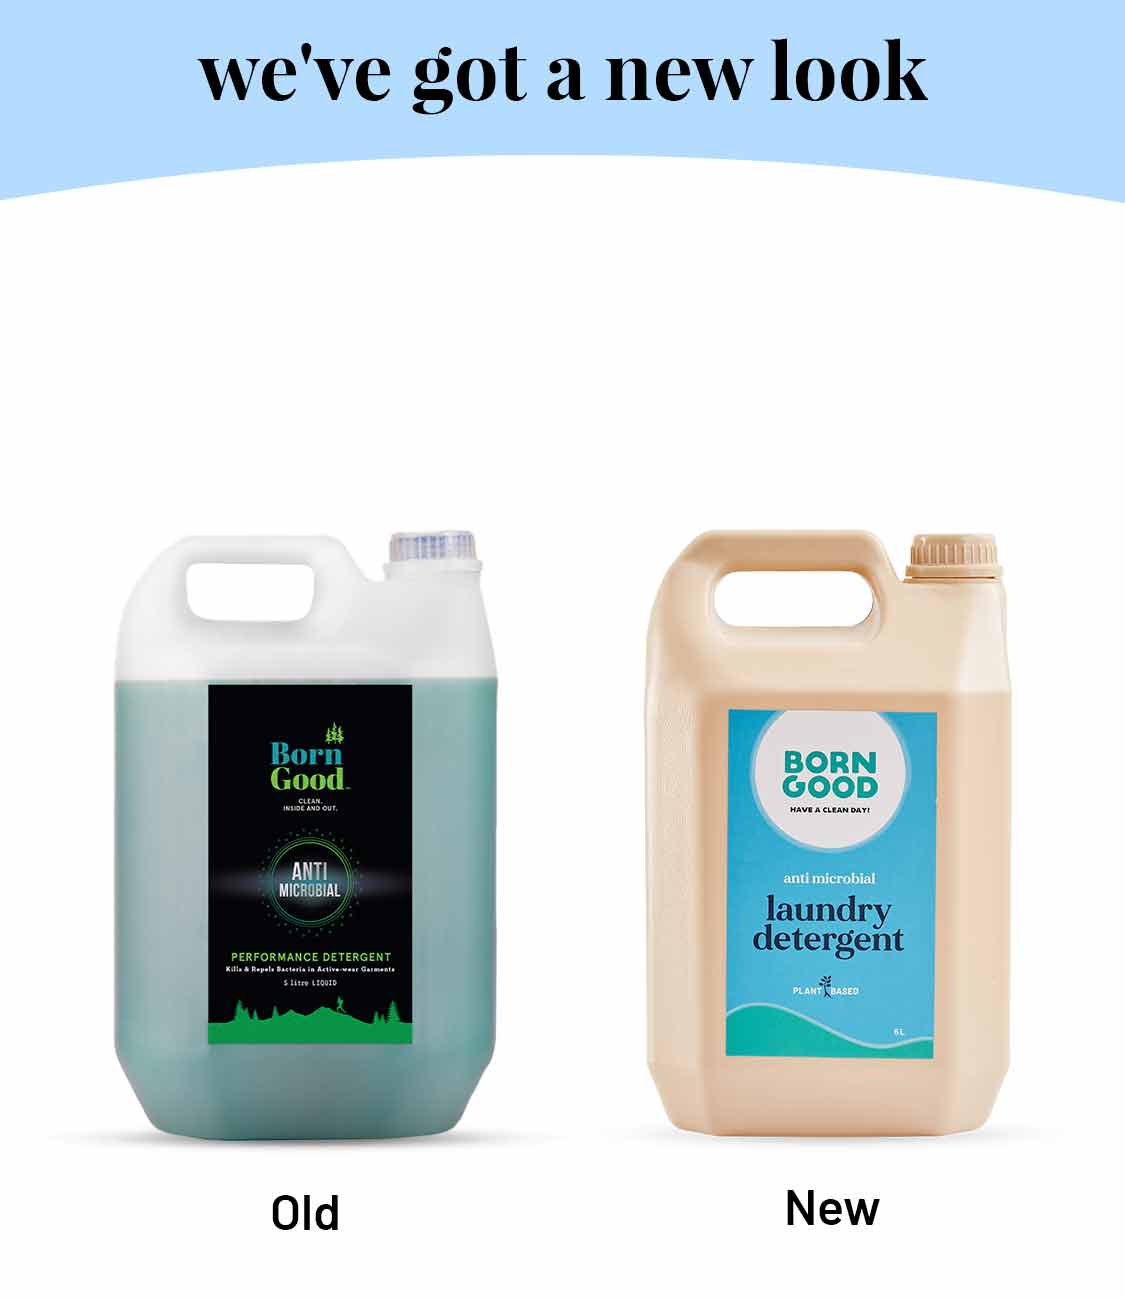 Born Good Plant-based Anti Microbial Laundry Detergent - 5 L Can